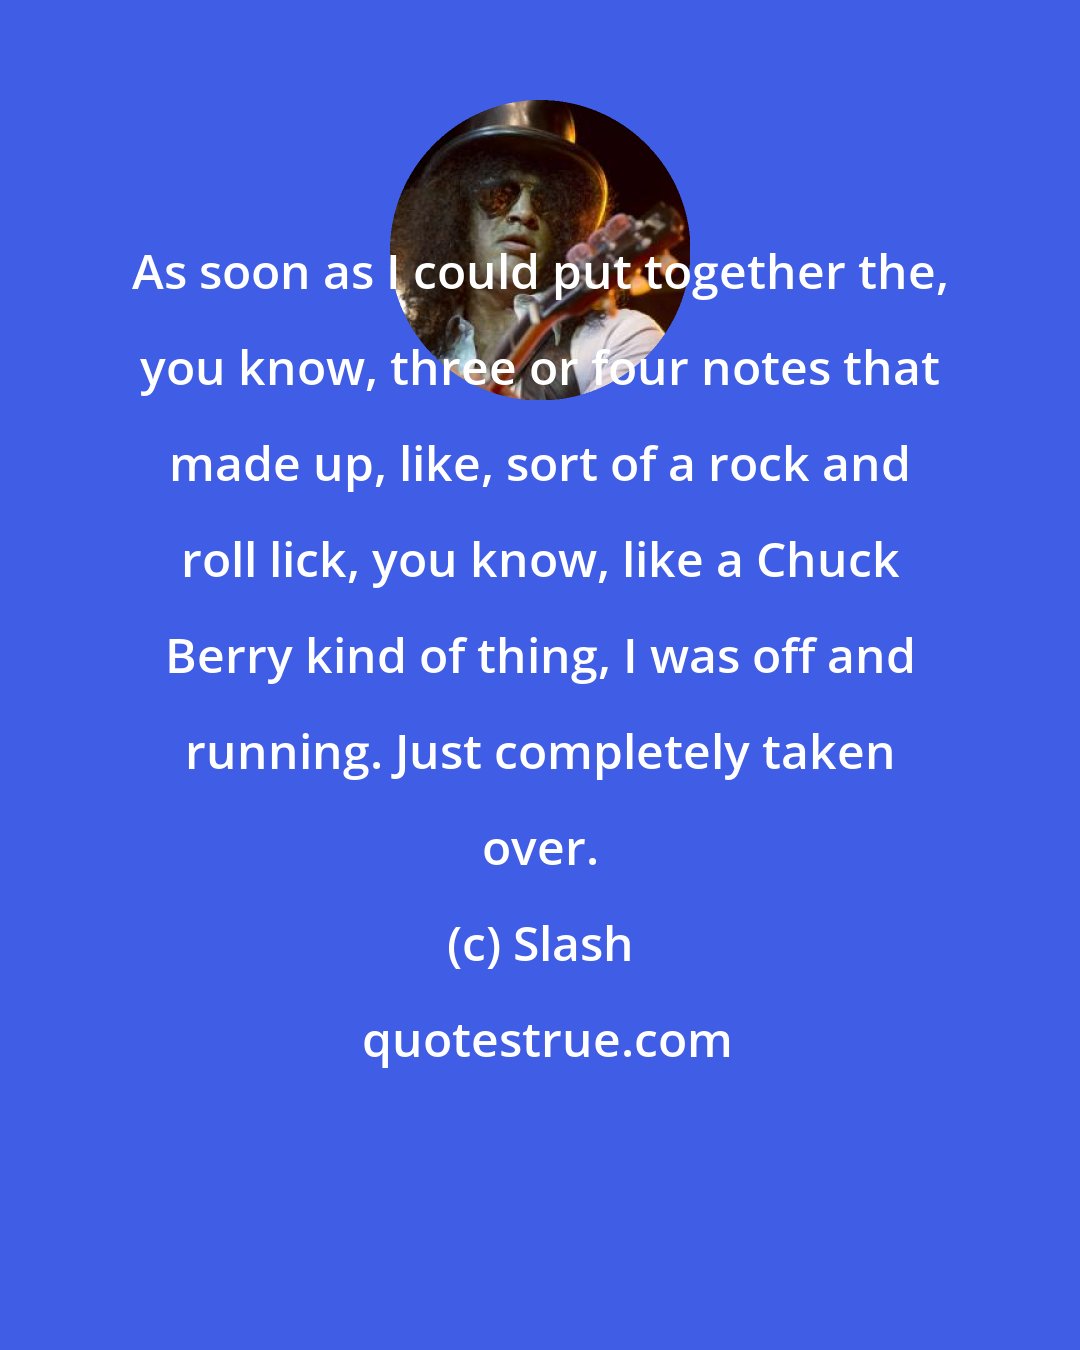 Slash: As soon as I could put together the, you know, three or four notes that made up, like, sort of a rock and roll lick, you know, like a Chuck Berry kind of thing, I was off and running. Just completely taken over.